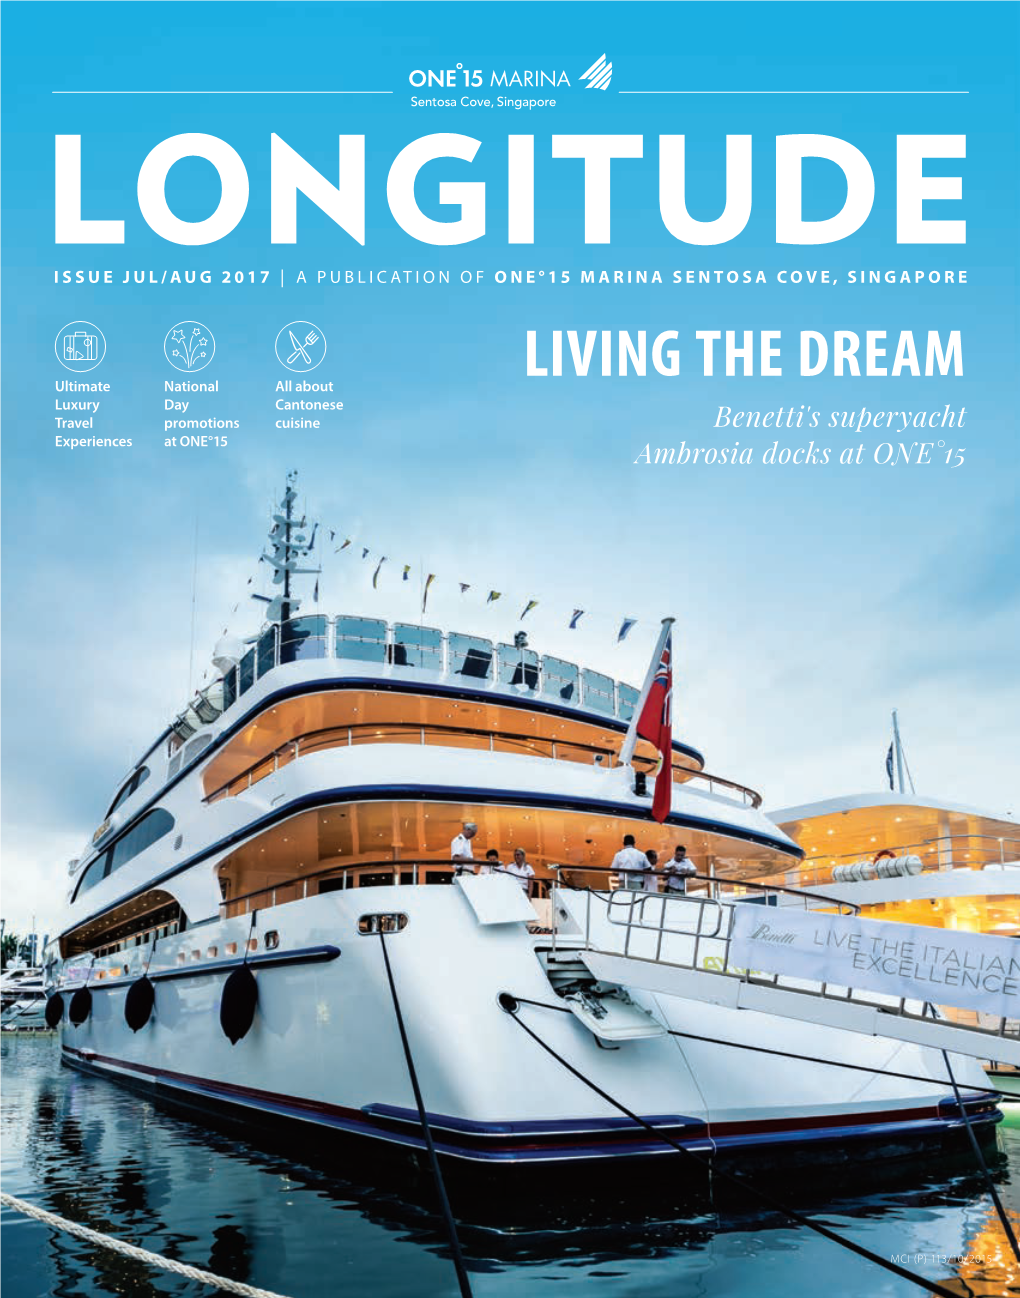 LIVING the DREAM Ultimate National All About Luxury Day Cantonese Travel Promotions Cuisine Benetti's Superyacht Experiences at ONE°15 Ambrosia Docks at ONE°15